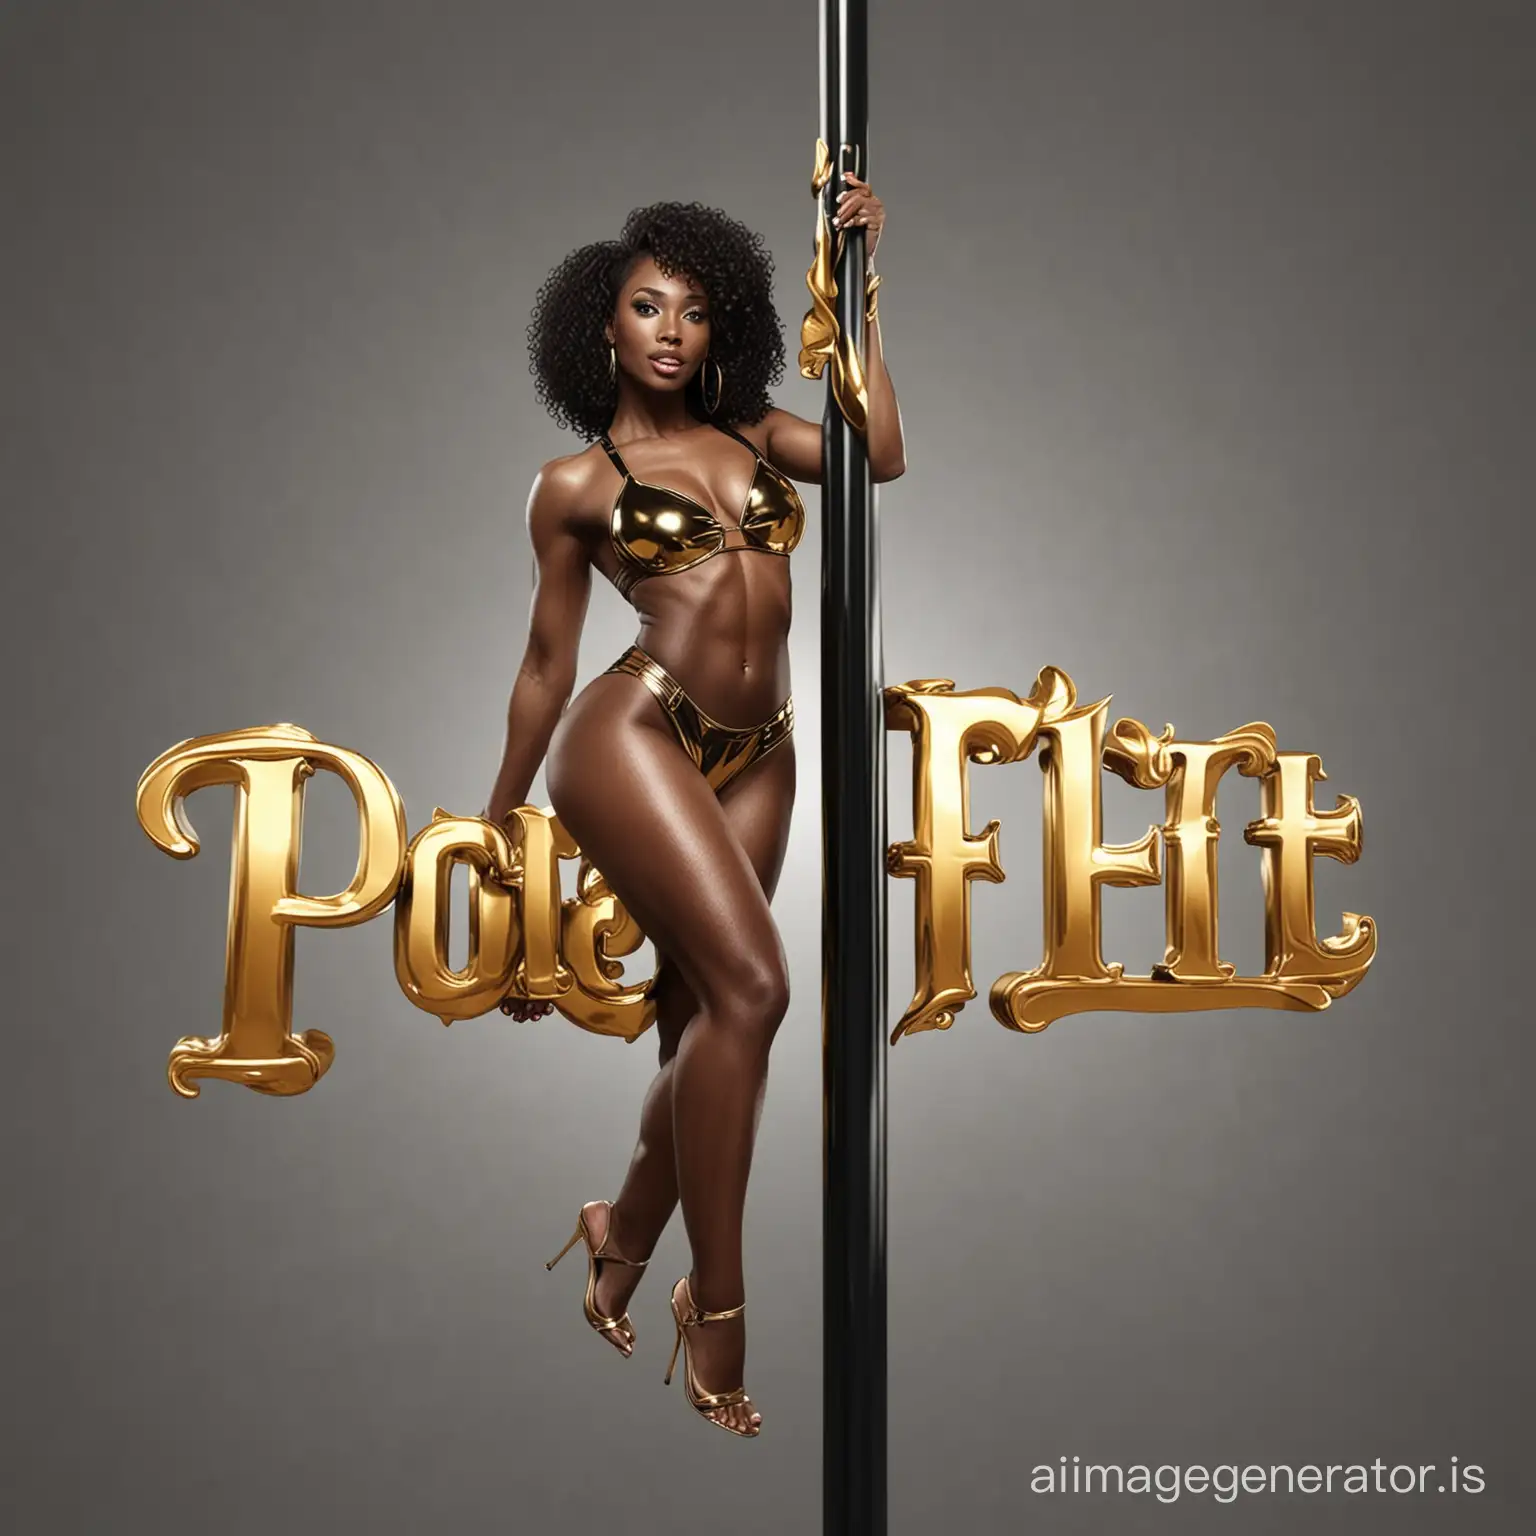 Create branding logo for "Pole Fit 101" Make the logo a metallic 3-D image sexy, fit black woman. Use colors black and gold stripper pole theme